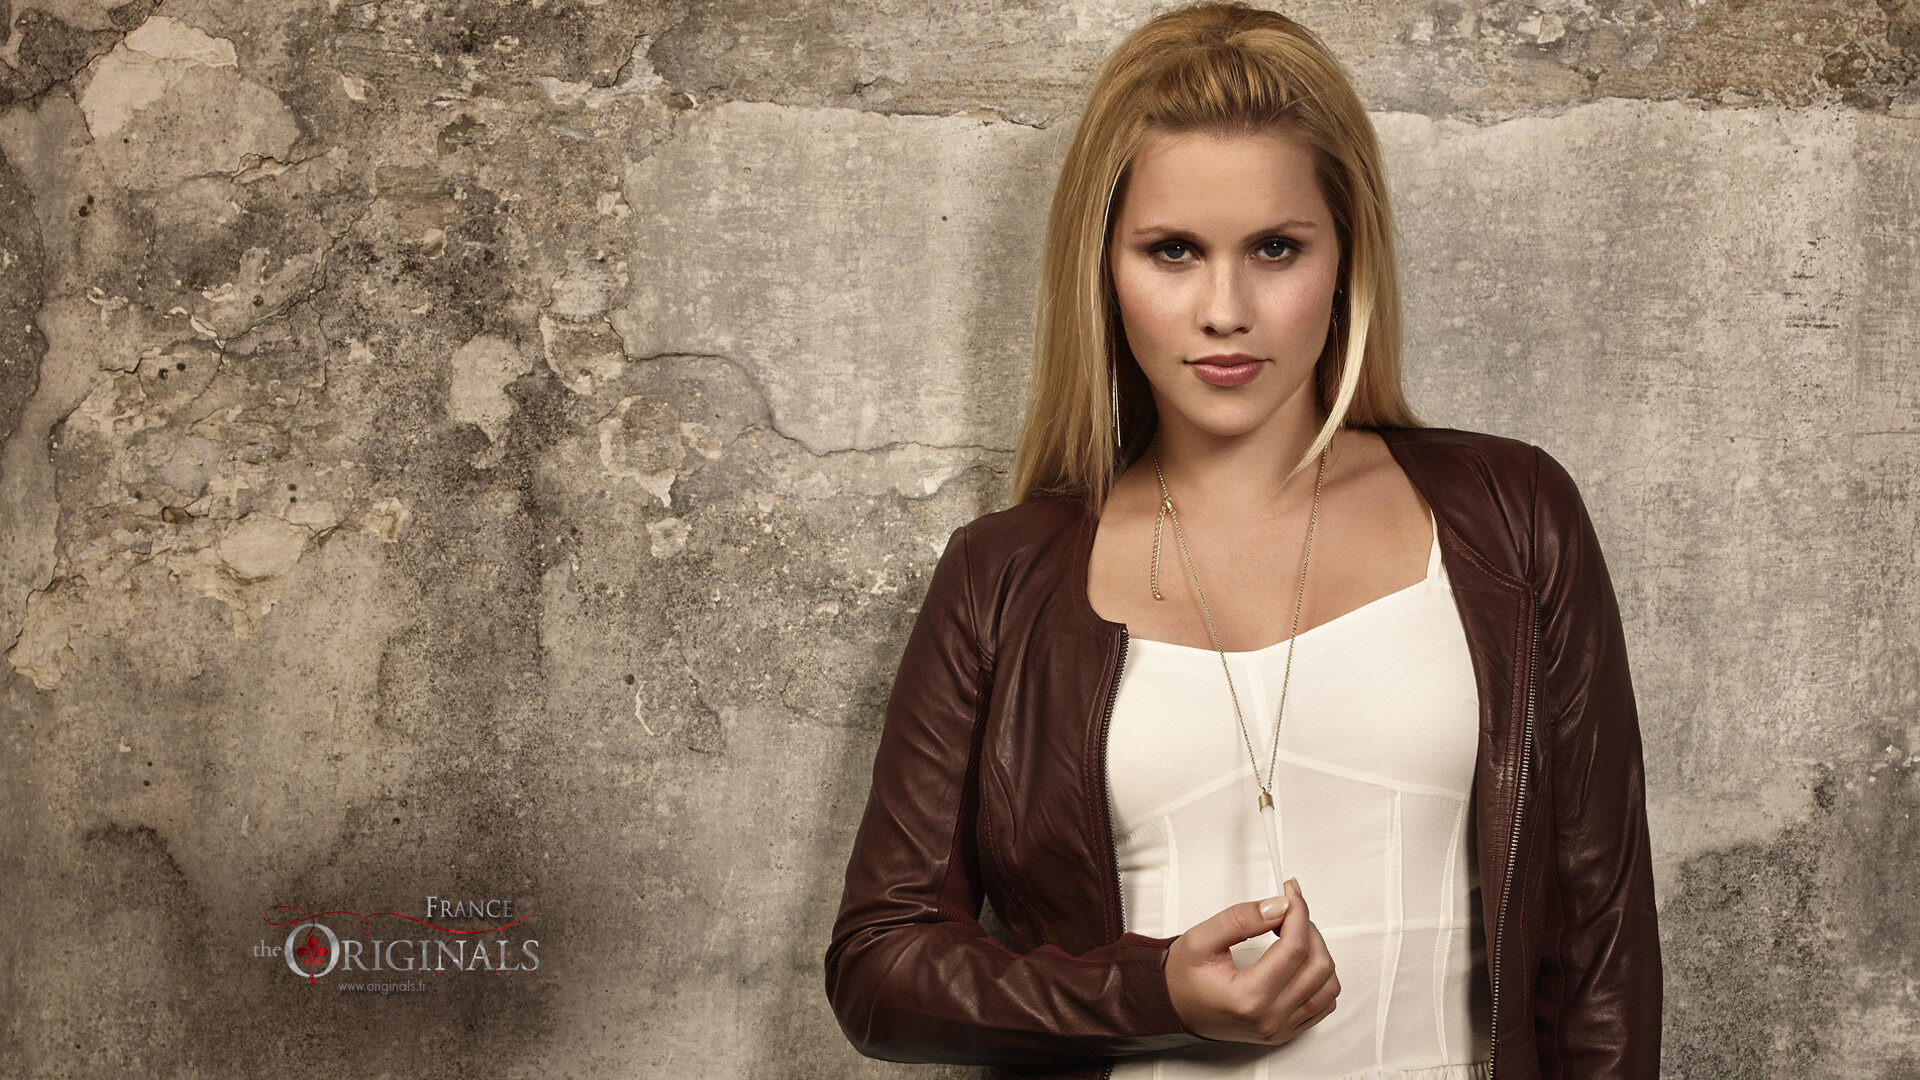 The Originals (TV Series): A spin-off of the supernatural drama The Vampire Diaries, Rebekah Mikaelson. 1920x1080 Full HD Background.